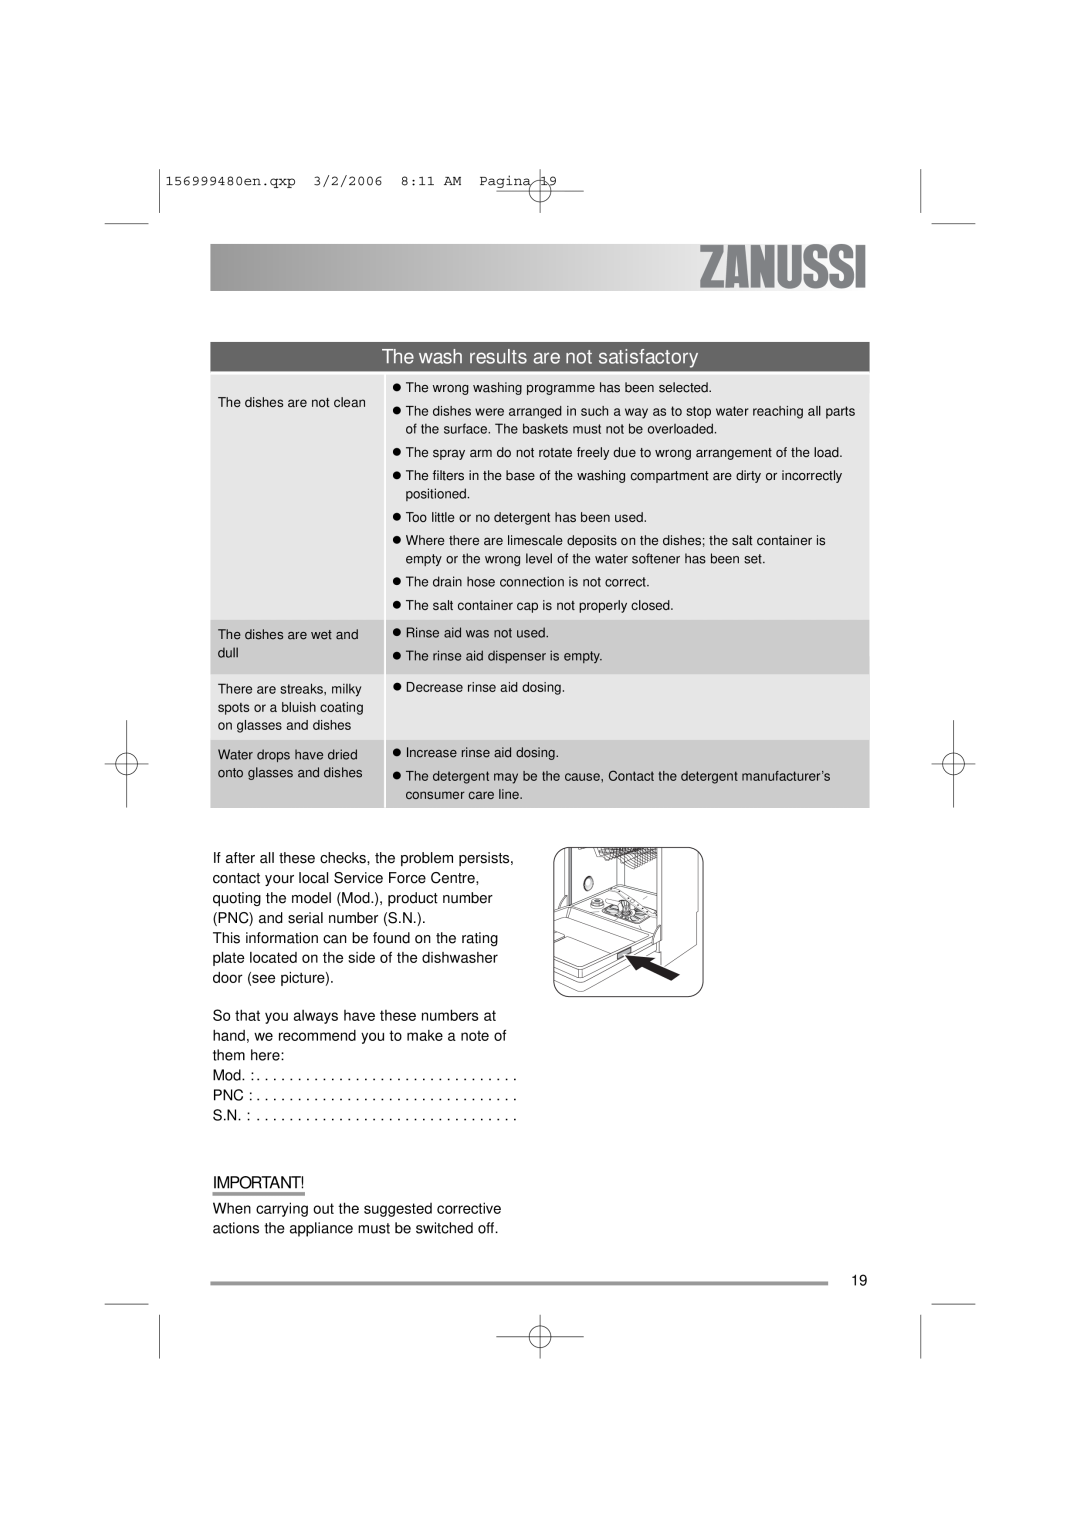 Zanussi ZDF311 user manual The wash results are not satisfactory 